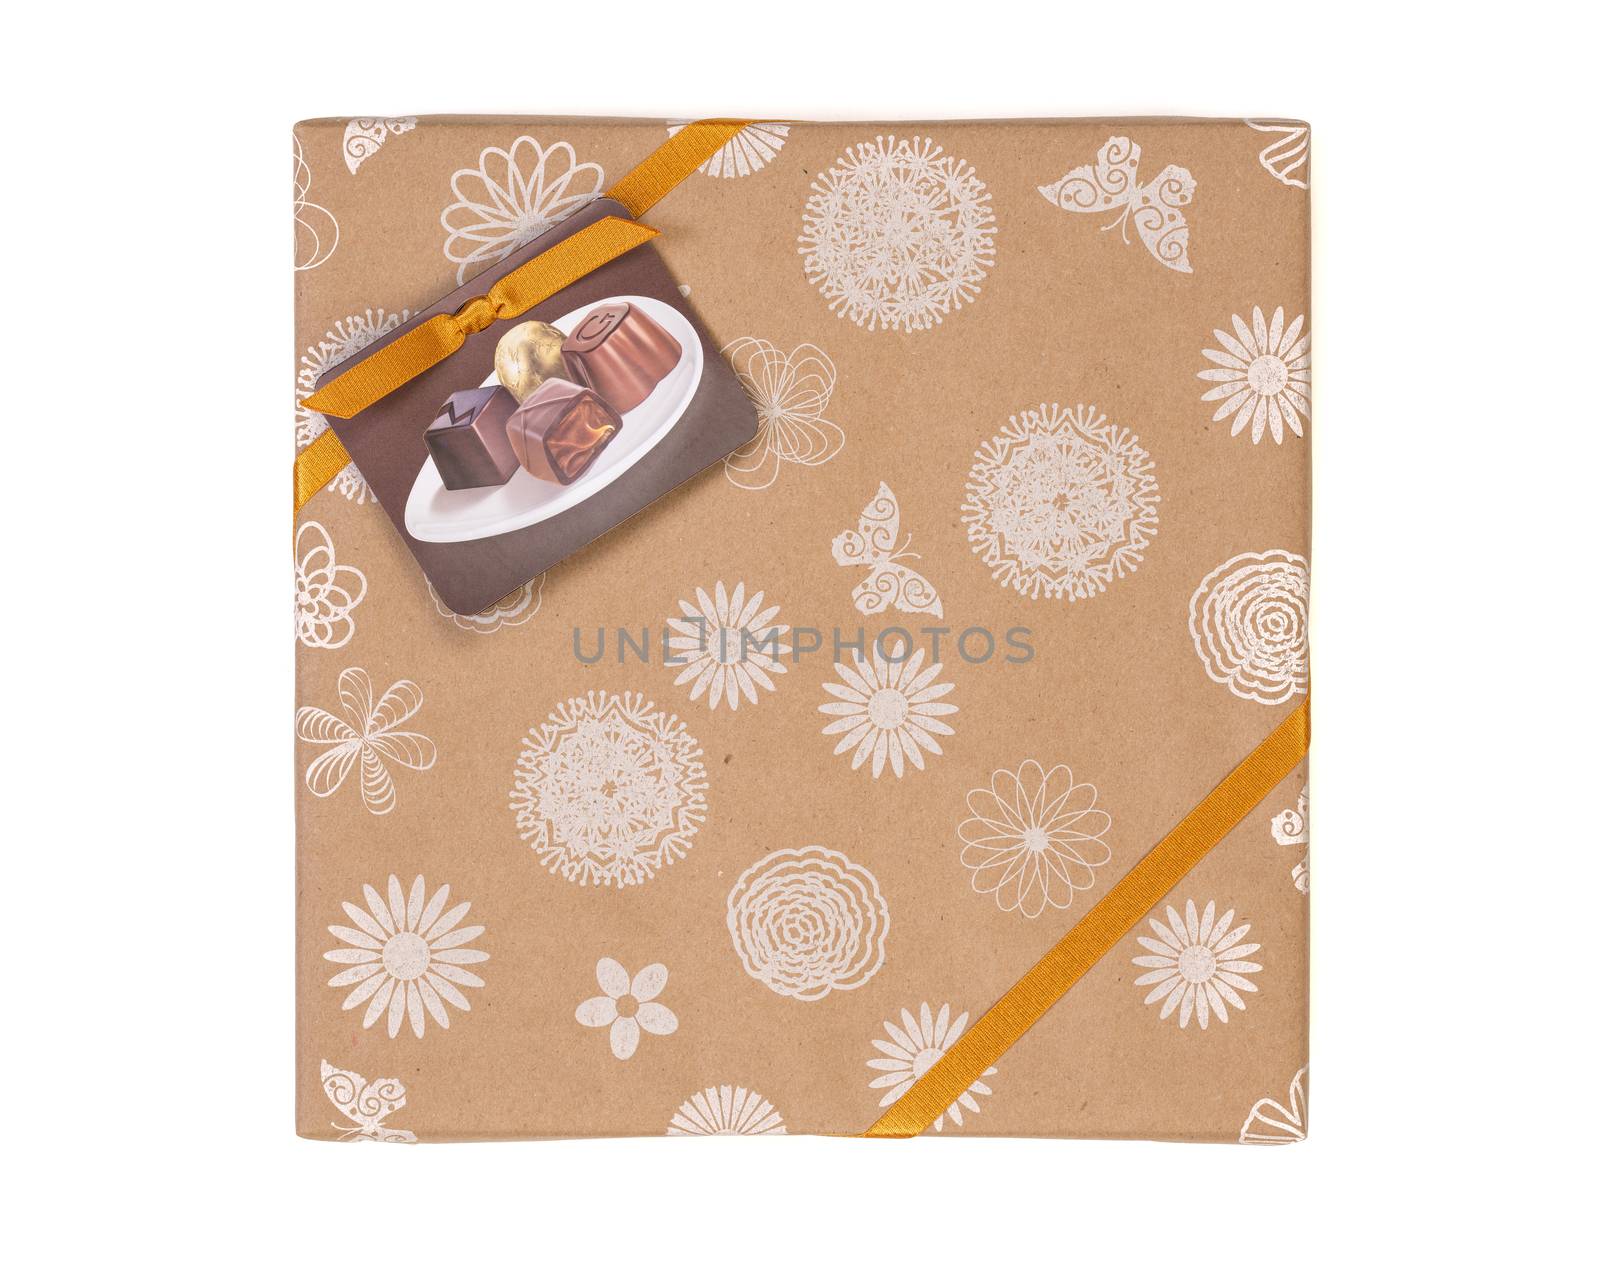 Gift wrapped box with chocolate candies and golden tape on a white background.